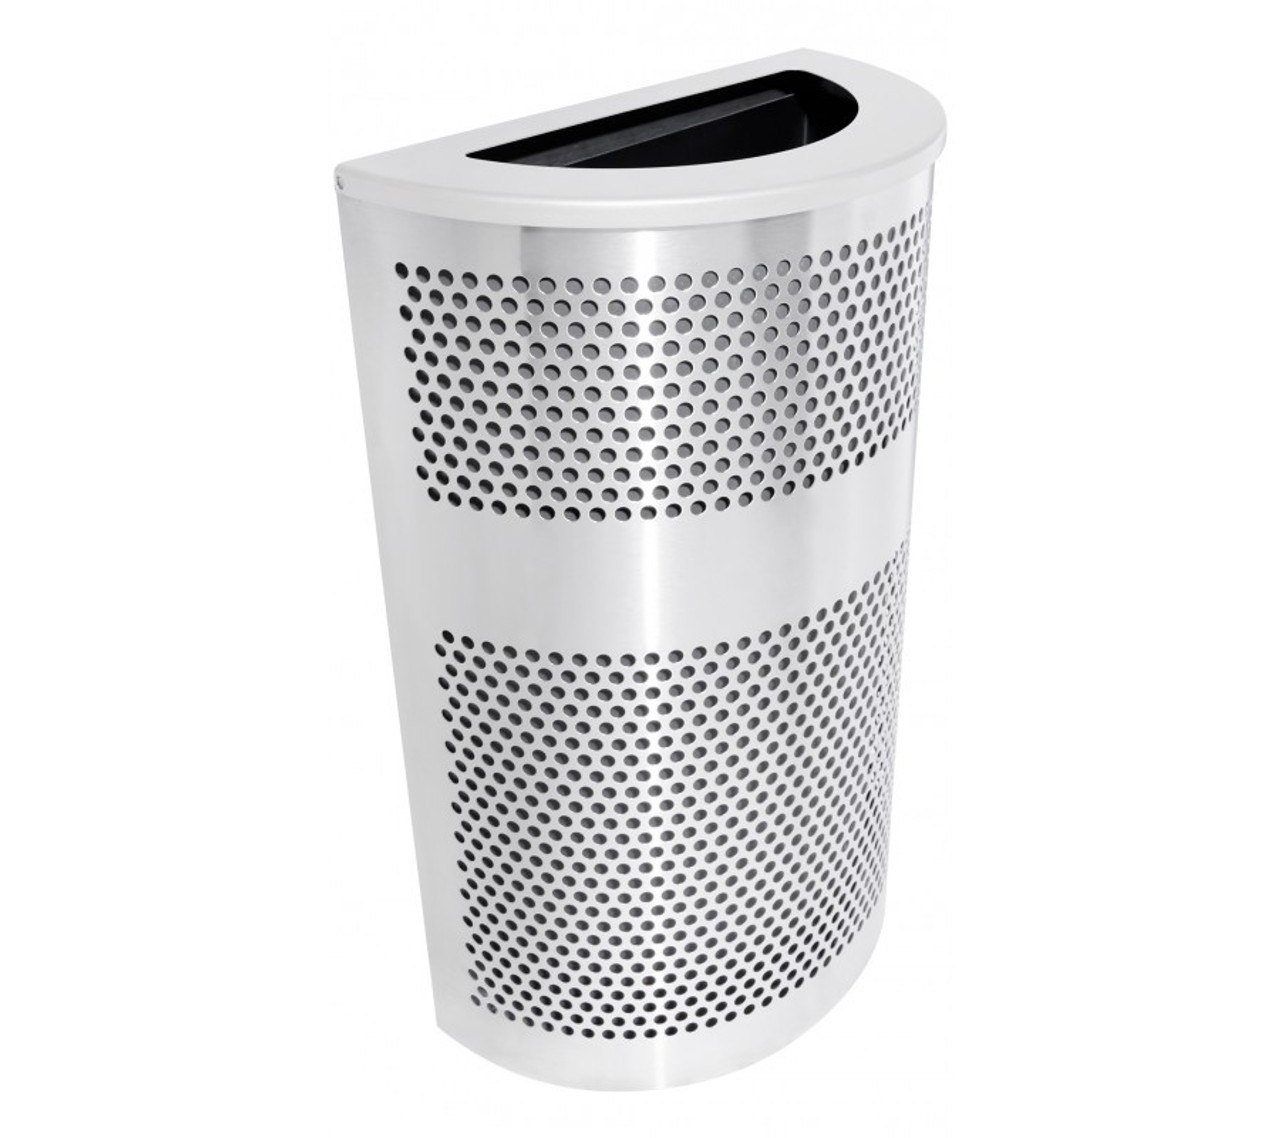 20 Gallon Perforated Half Round Stainless Steel Trash Can VC2234 HR SS/PLTNM